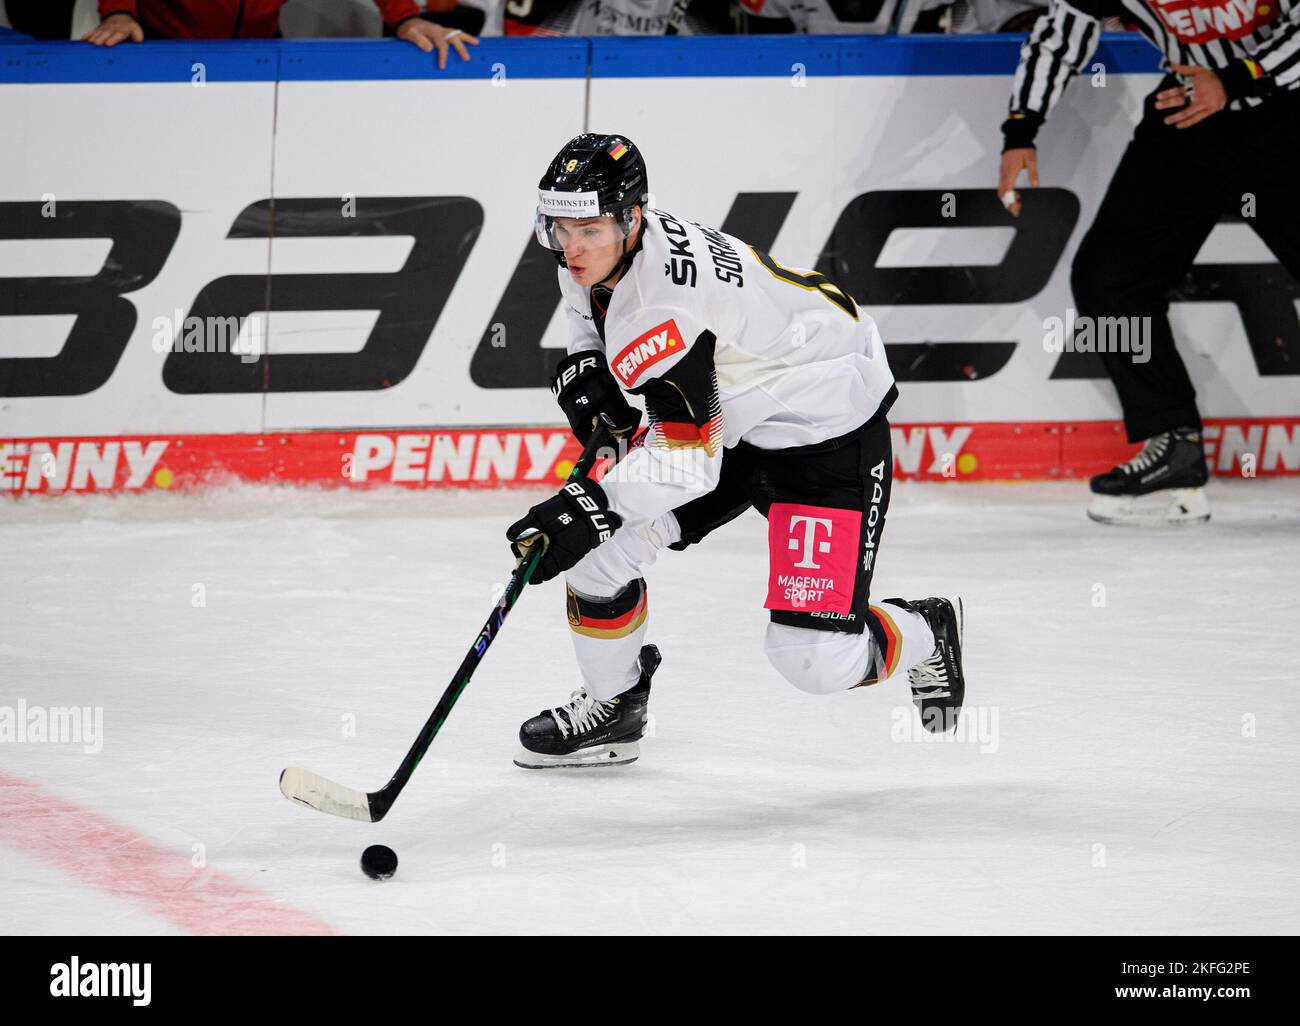 Samuel SORAMIES (GER) Action, Germany (GER) - Slovakia (SVK), on 11/13/2021. Ice Hockey Germany Cup from 10.11. - 13.11.2022 in Krefeld/ Germany. Stock Photo